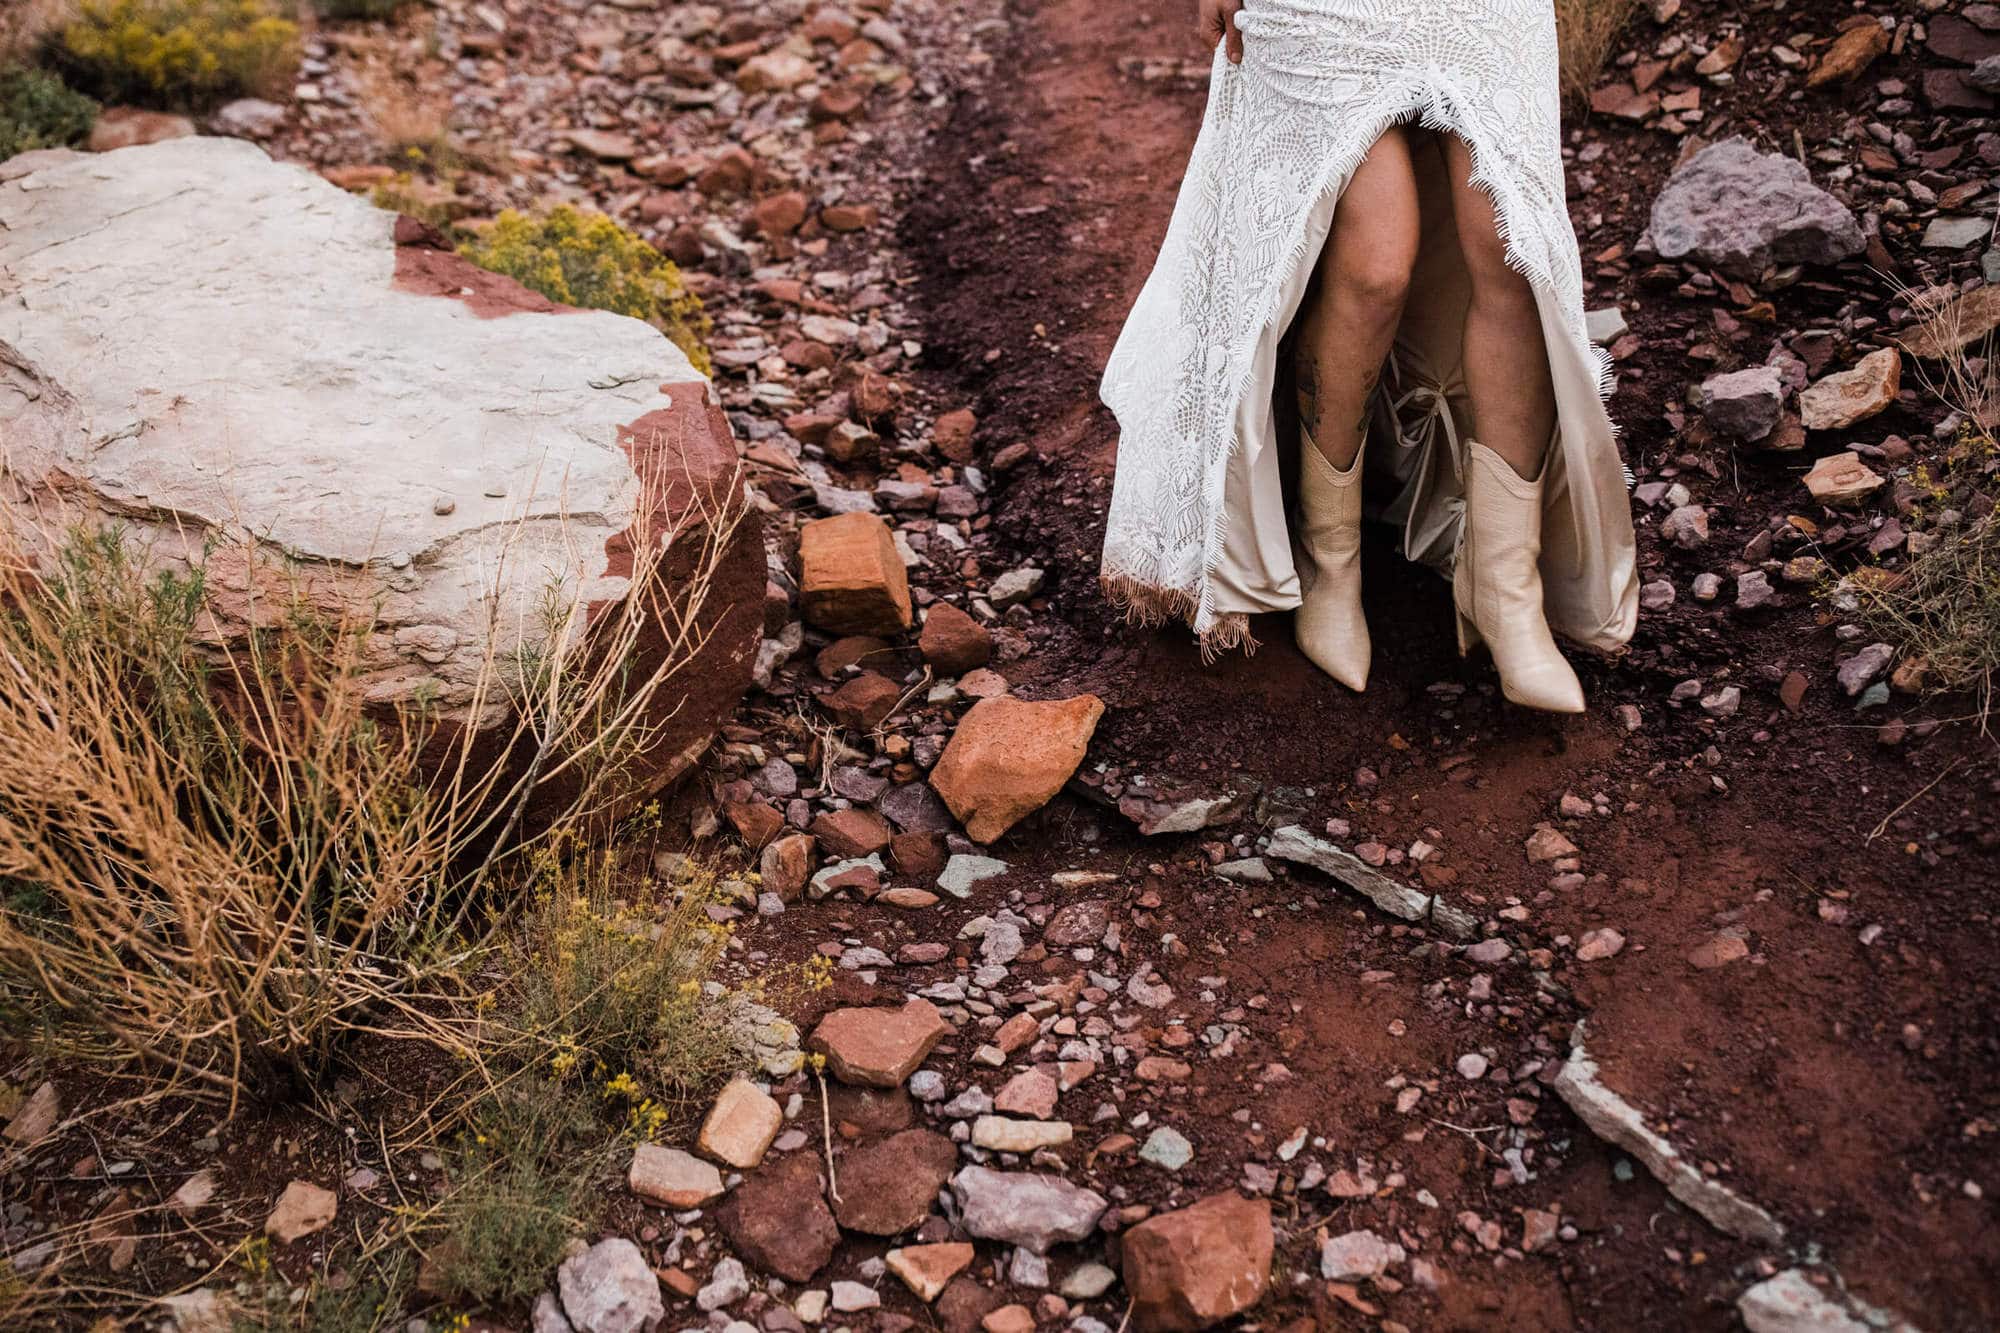 A wedding of off-road locations, campsite celebrations, and rock climbing adventures, this adventure wedding in Moab is one for the ages.